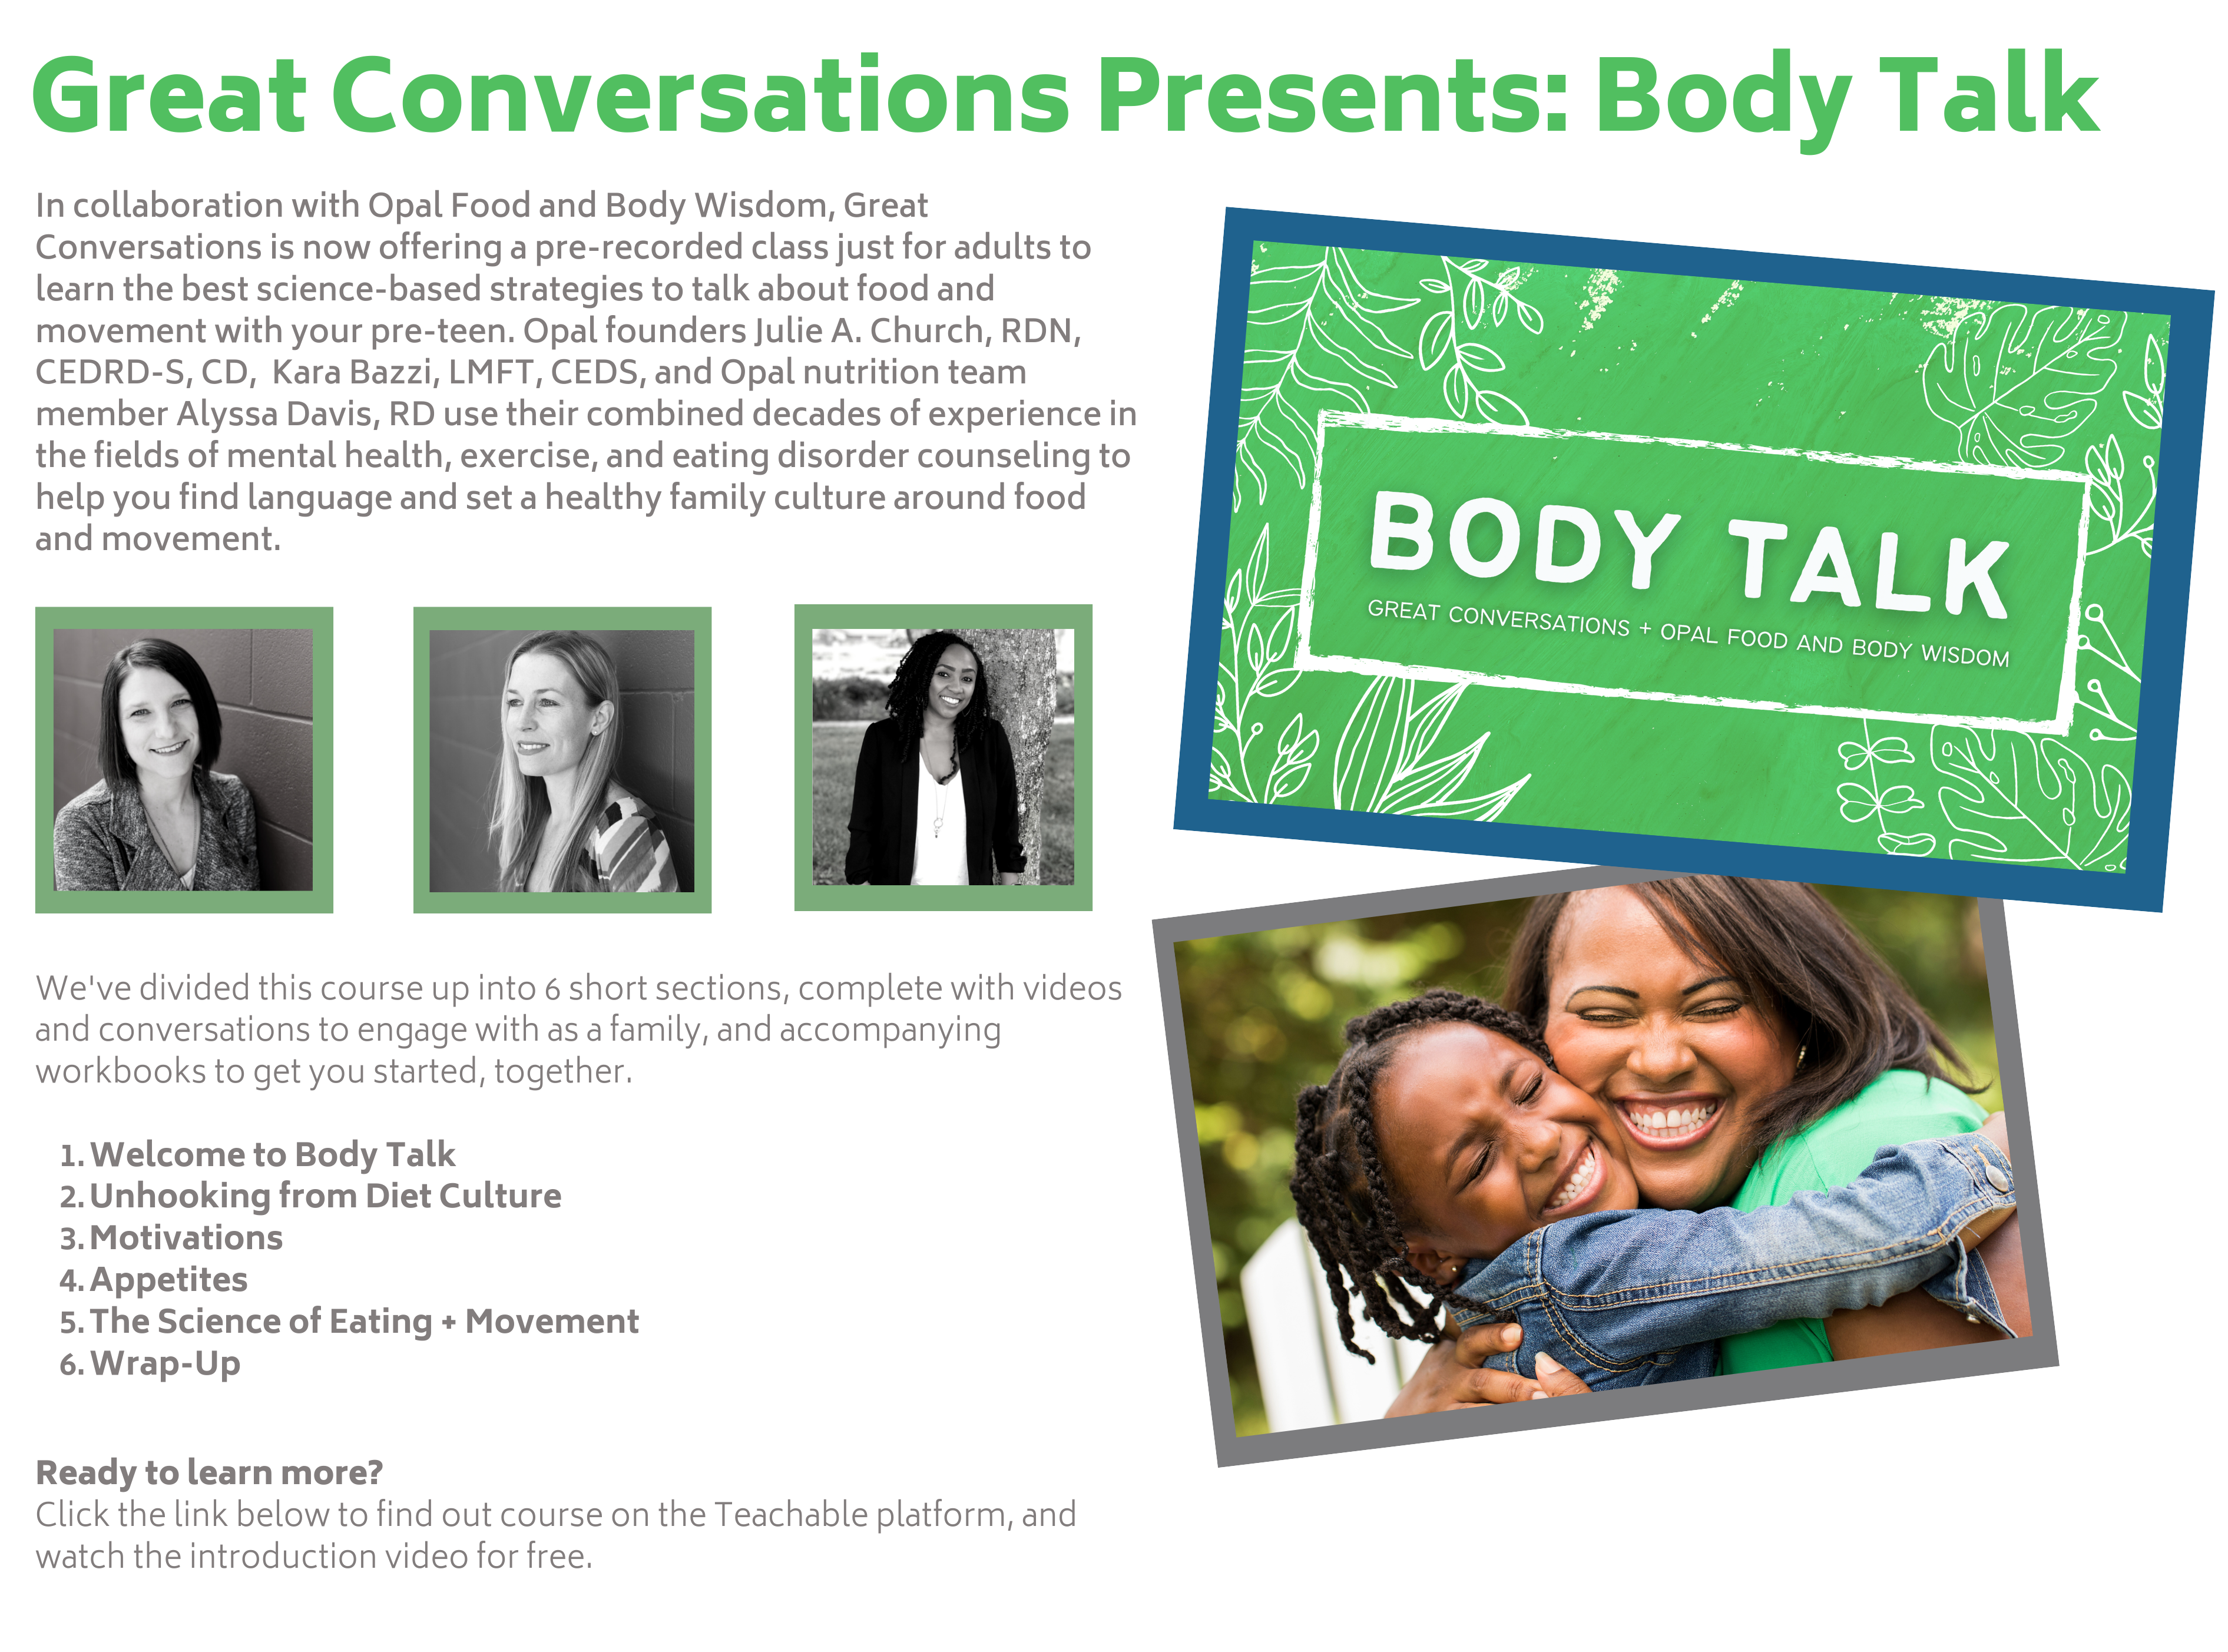 Great Conversations Presents: Body Talk in collaboration with Opal Food and Body Wisdom, Great Conversations is now offering a pre-recorded class just for adults to learn the best science-based strategies to talk about food and movement with your pre-teen. Opal founders Julie A. Church, RDN, CEDRD-S, CD, Kara Bazzi, LMFT, CEDS, and Opal nutrition team member Alyssa Davis, RD use their combined decades of experience in the fields of mental health, exercise, and eating disorder counseling to help you find language and set a healthy family culture around food and movement. 

We've divided this course up into 6 short sections, complete with videos and conversations to engage with as a family, and accompanying workbooks to get you started, together.

Welcome to Body Talk
Unhooking from Diet Culture
Motivations
Appetites
The Science of Eating + Movement
Wrap-Up
Ready to learn more?
Click the link below to find out course on the Teachable platform, and watch the introduction video for free.